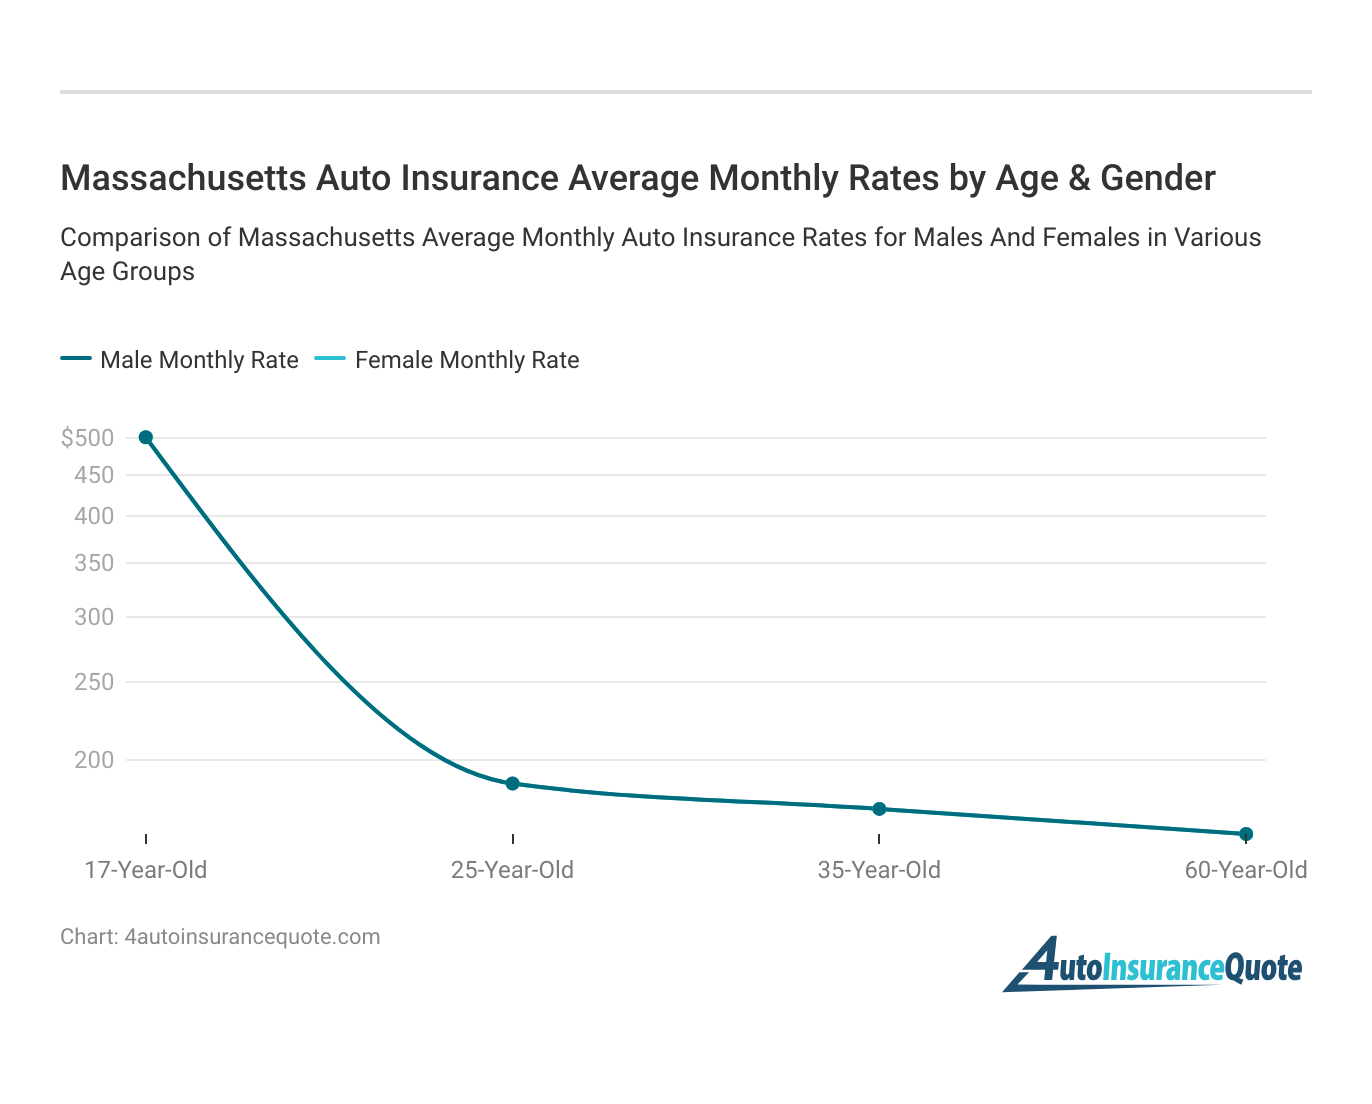 <h3>Massachusetts Auto Insurance Average Monthly Rates by Age & Gender</h3>